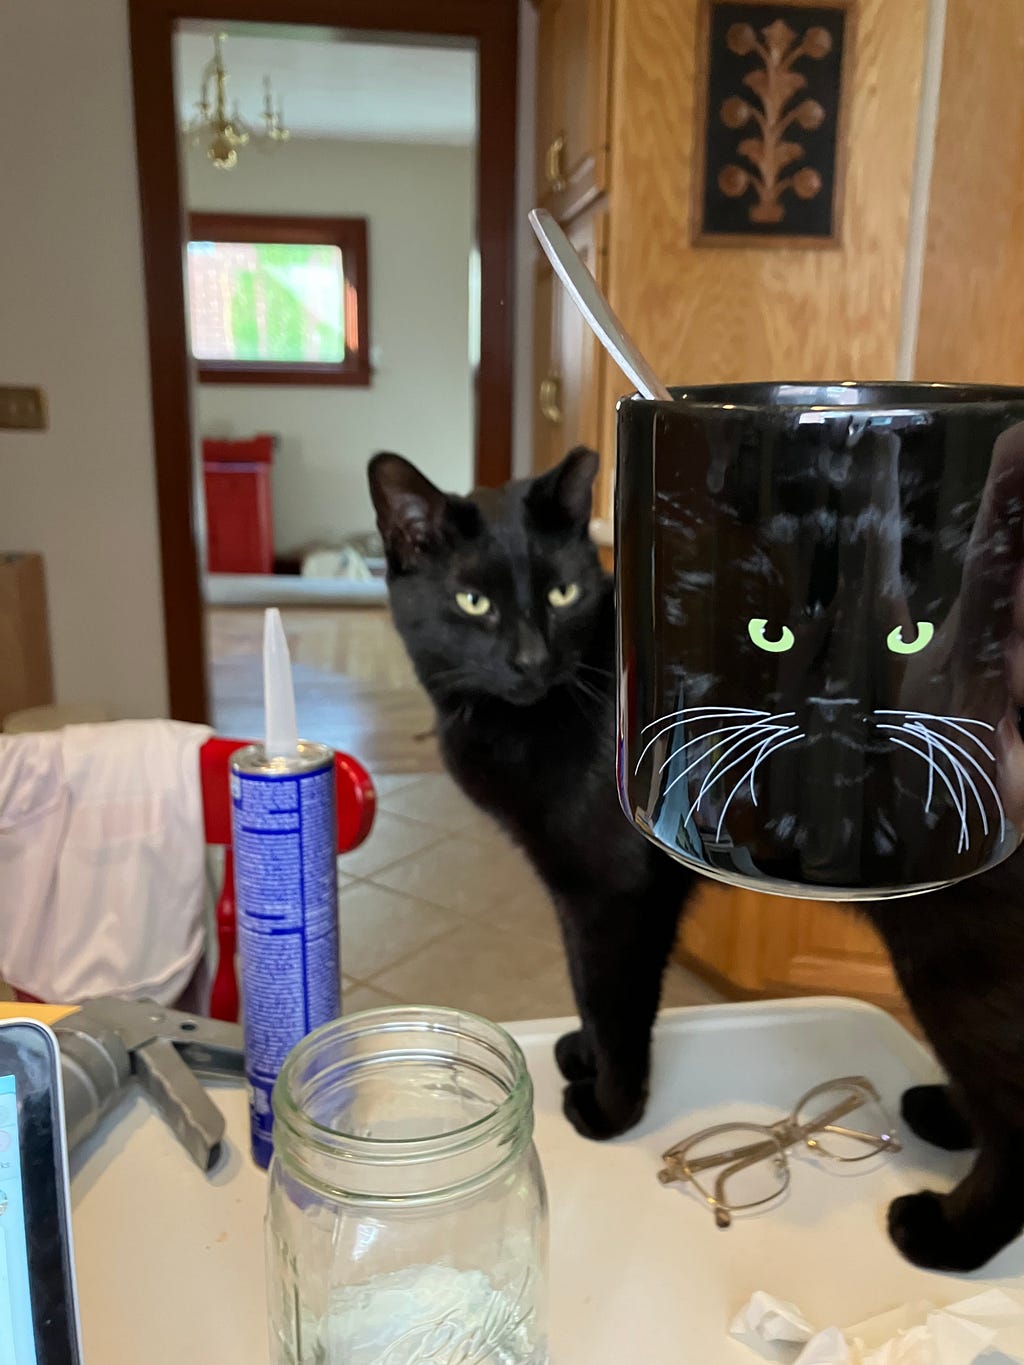 A black mug with a cat’s face on it being held up with an actual black cat standing in the background.